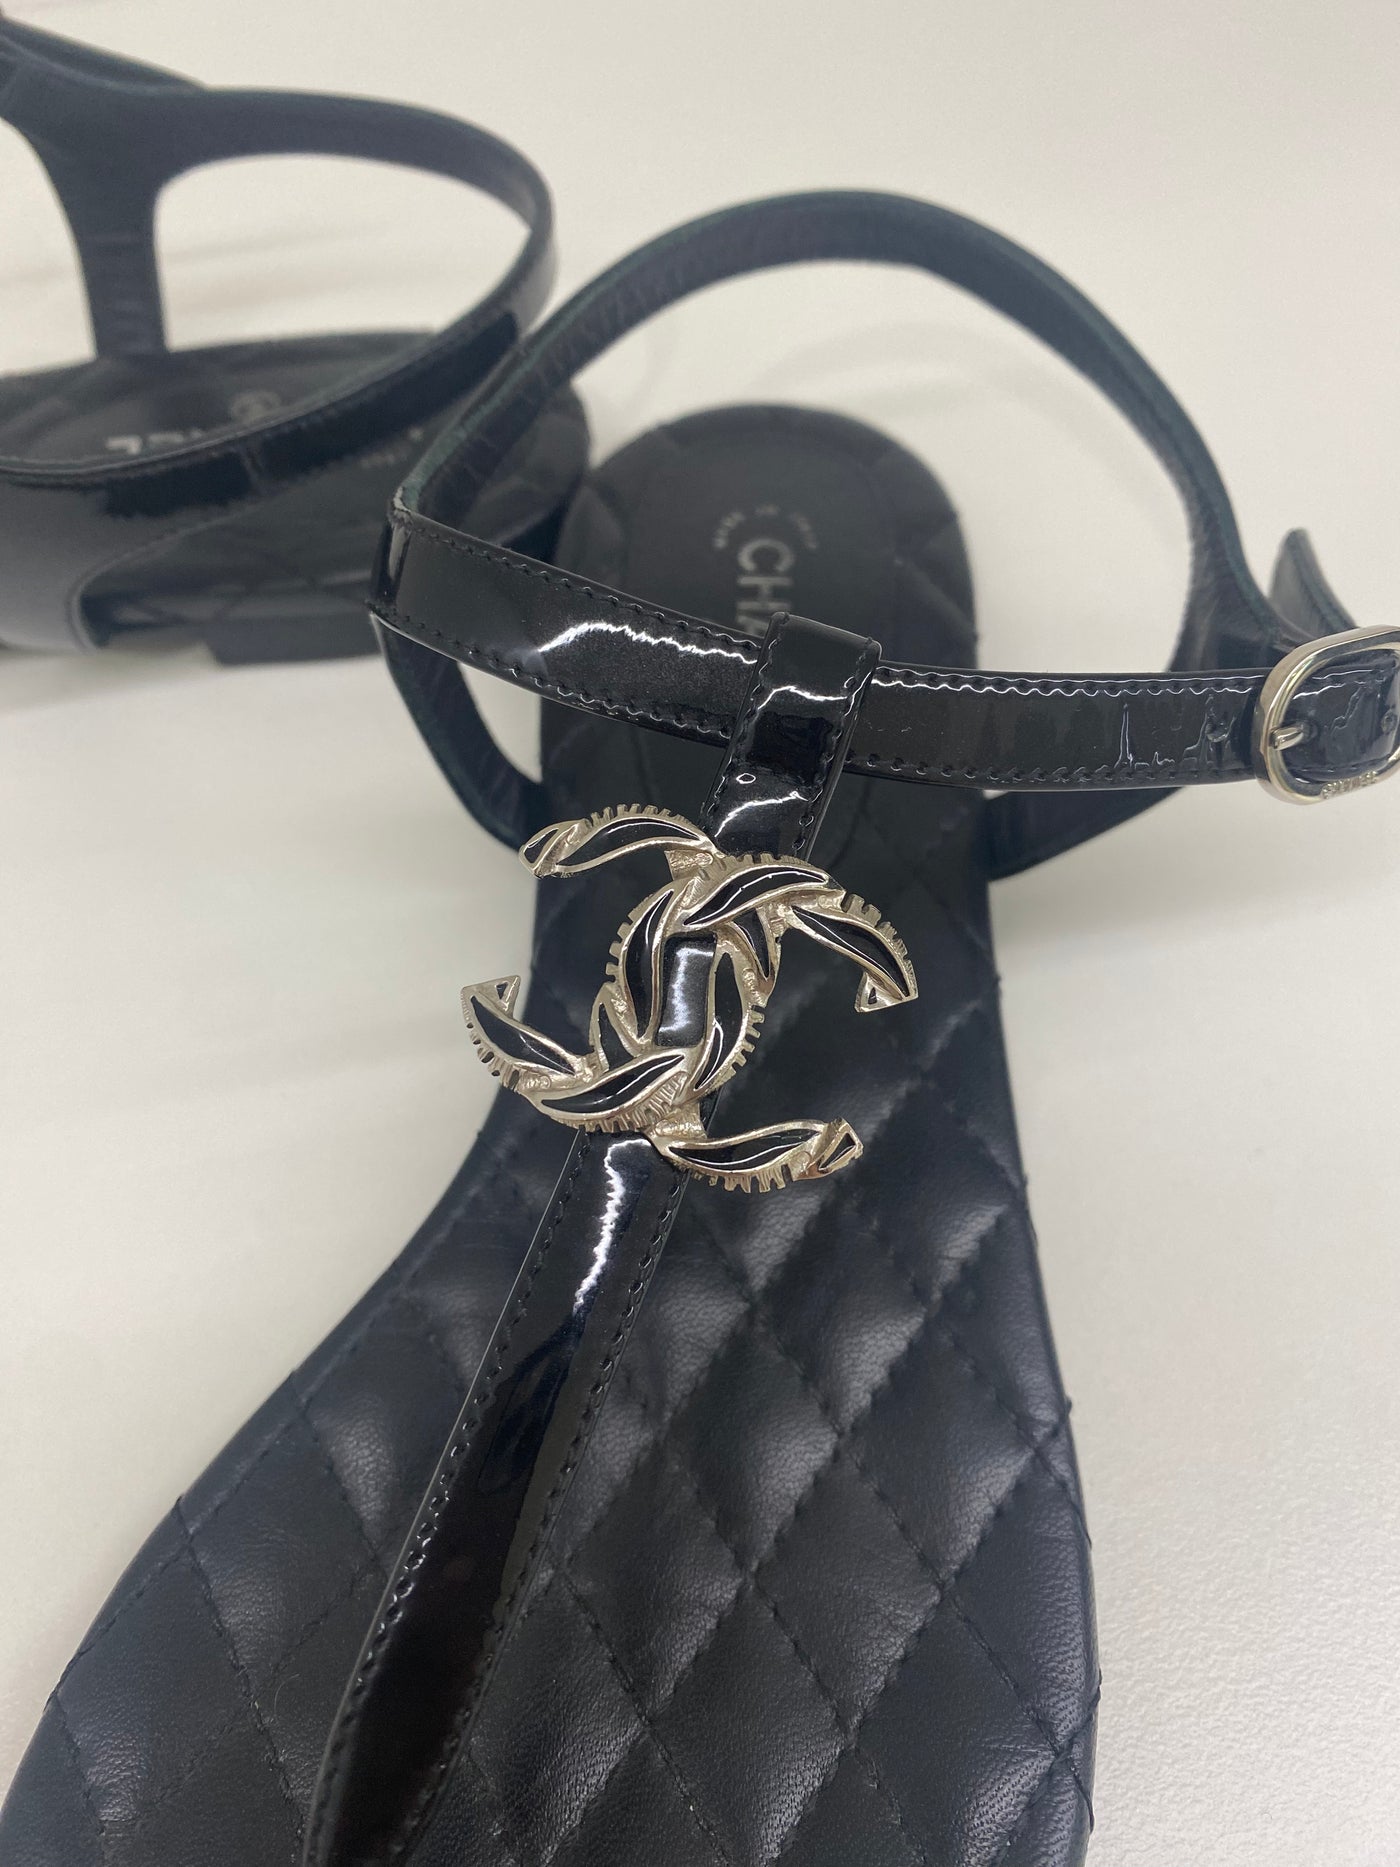 Chanel Thong Sandals 36.5 - SOLD